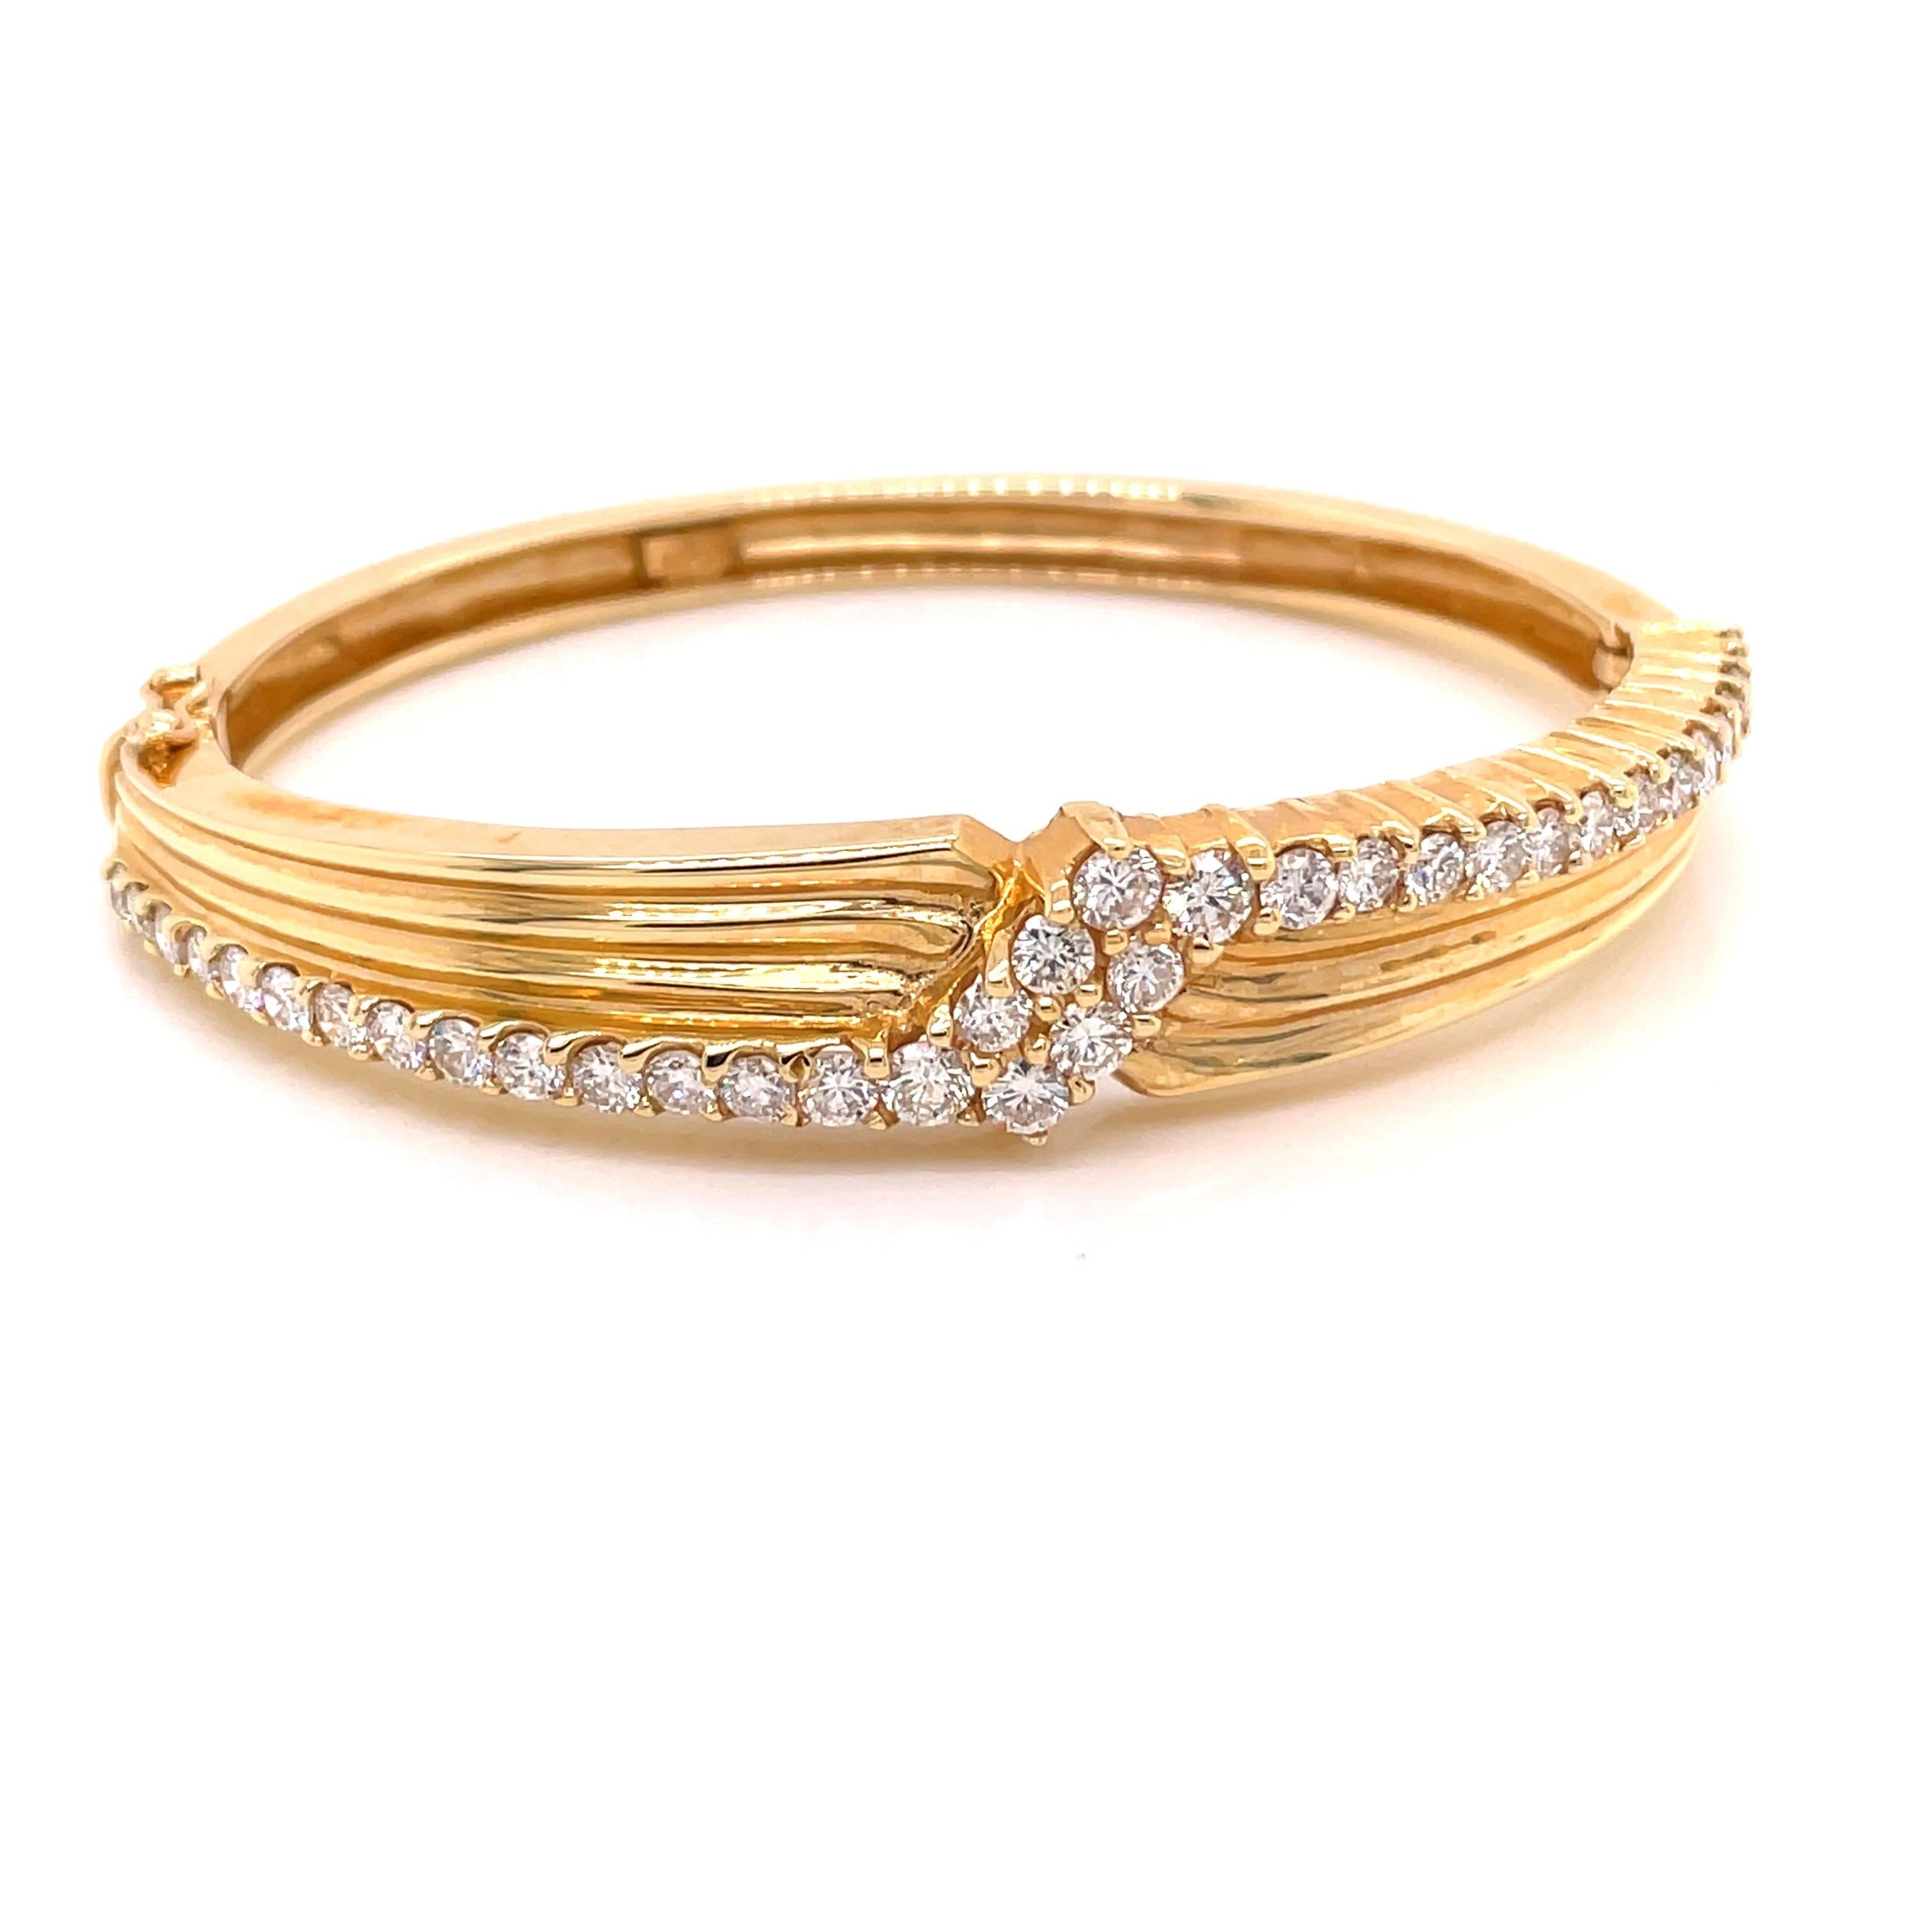 14K Yellow Gold Diamond Lightning Bolt Bangle Bracelet 2.50ct - The bangle is set with 36 round brilliant diamonds weighing 2.50ct with G - H color and VS2 - SI1 clarity. The width of the bangle is 11mm on top and tapers to 5mm on the bottom. The